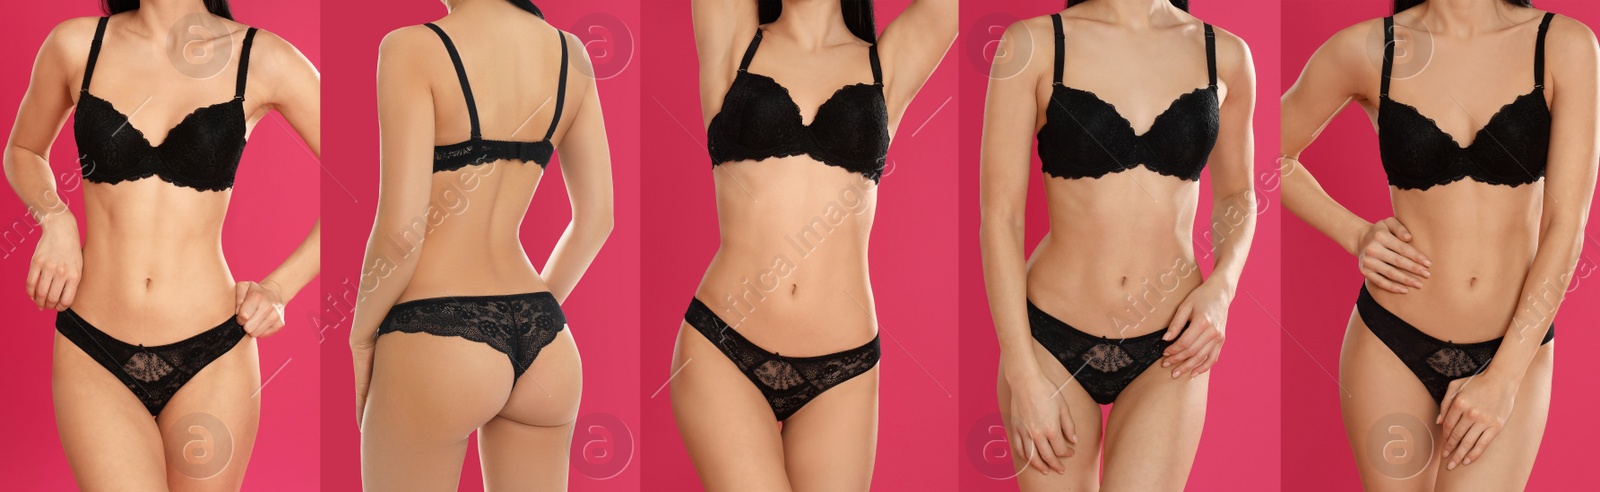 Image of Collage of young woman in black underwear on pink background, closeup